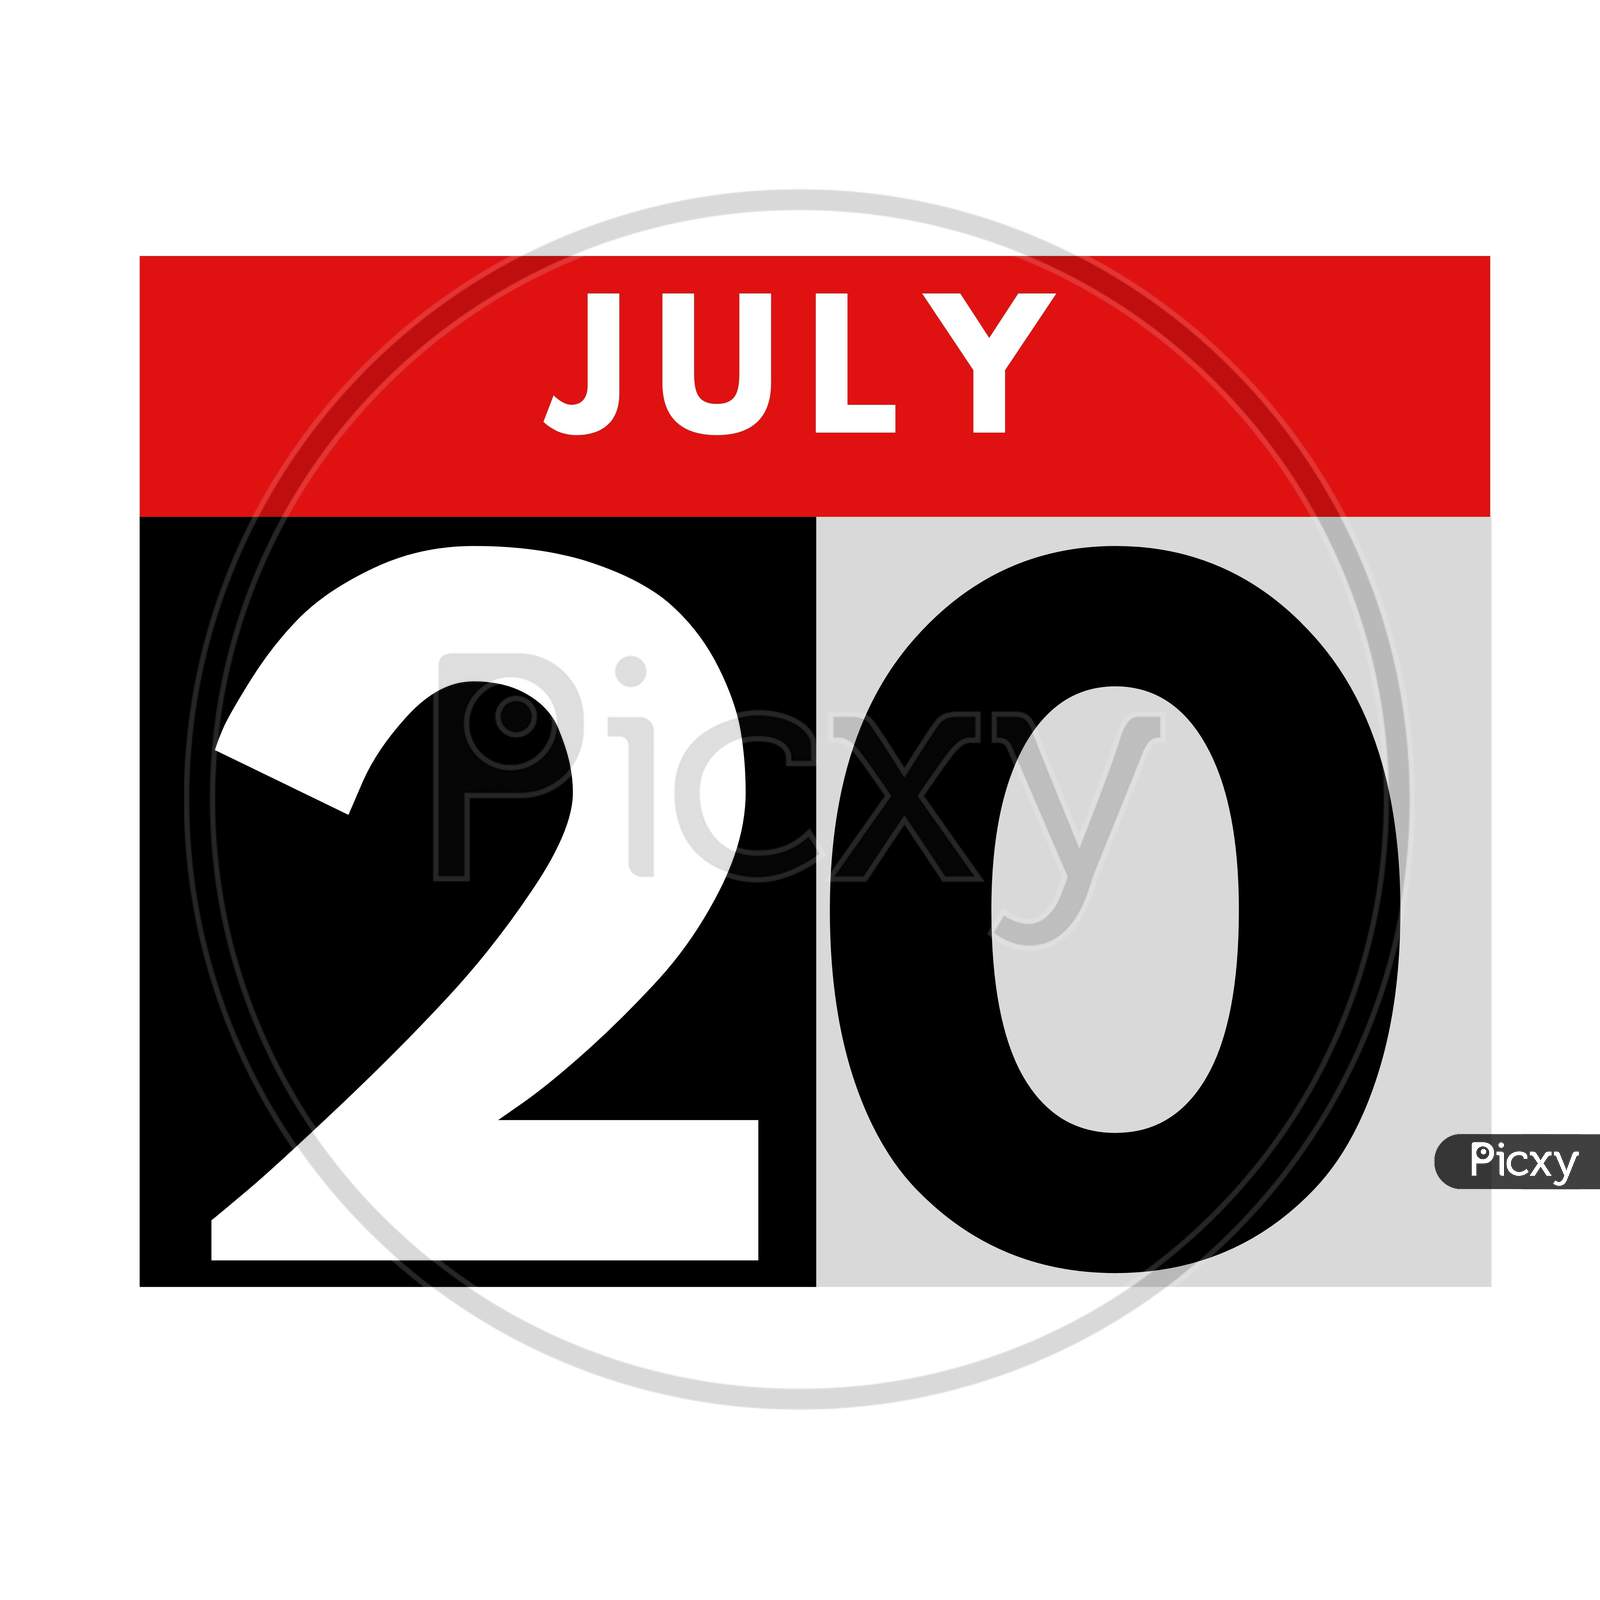 Image Of July 20 Flat Daily Calendar Icon Date Day Month Calendar For The Month Of July If980886 Picxy